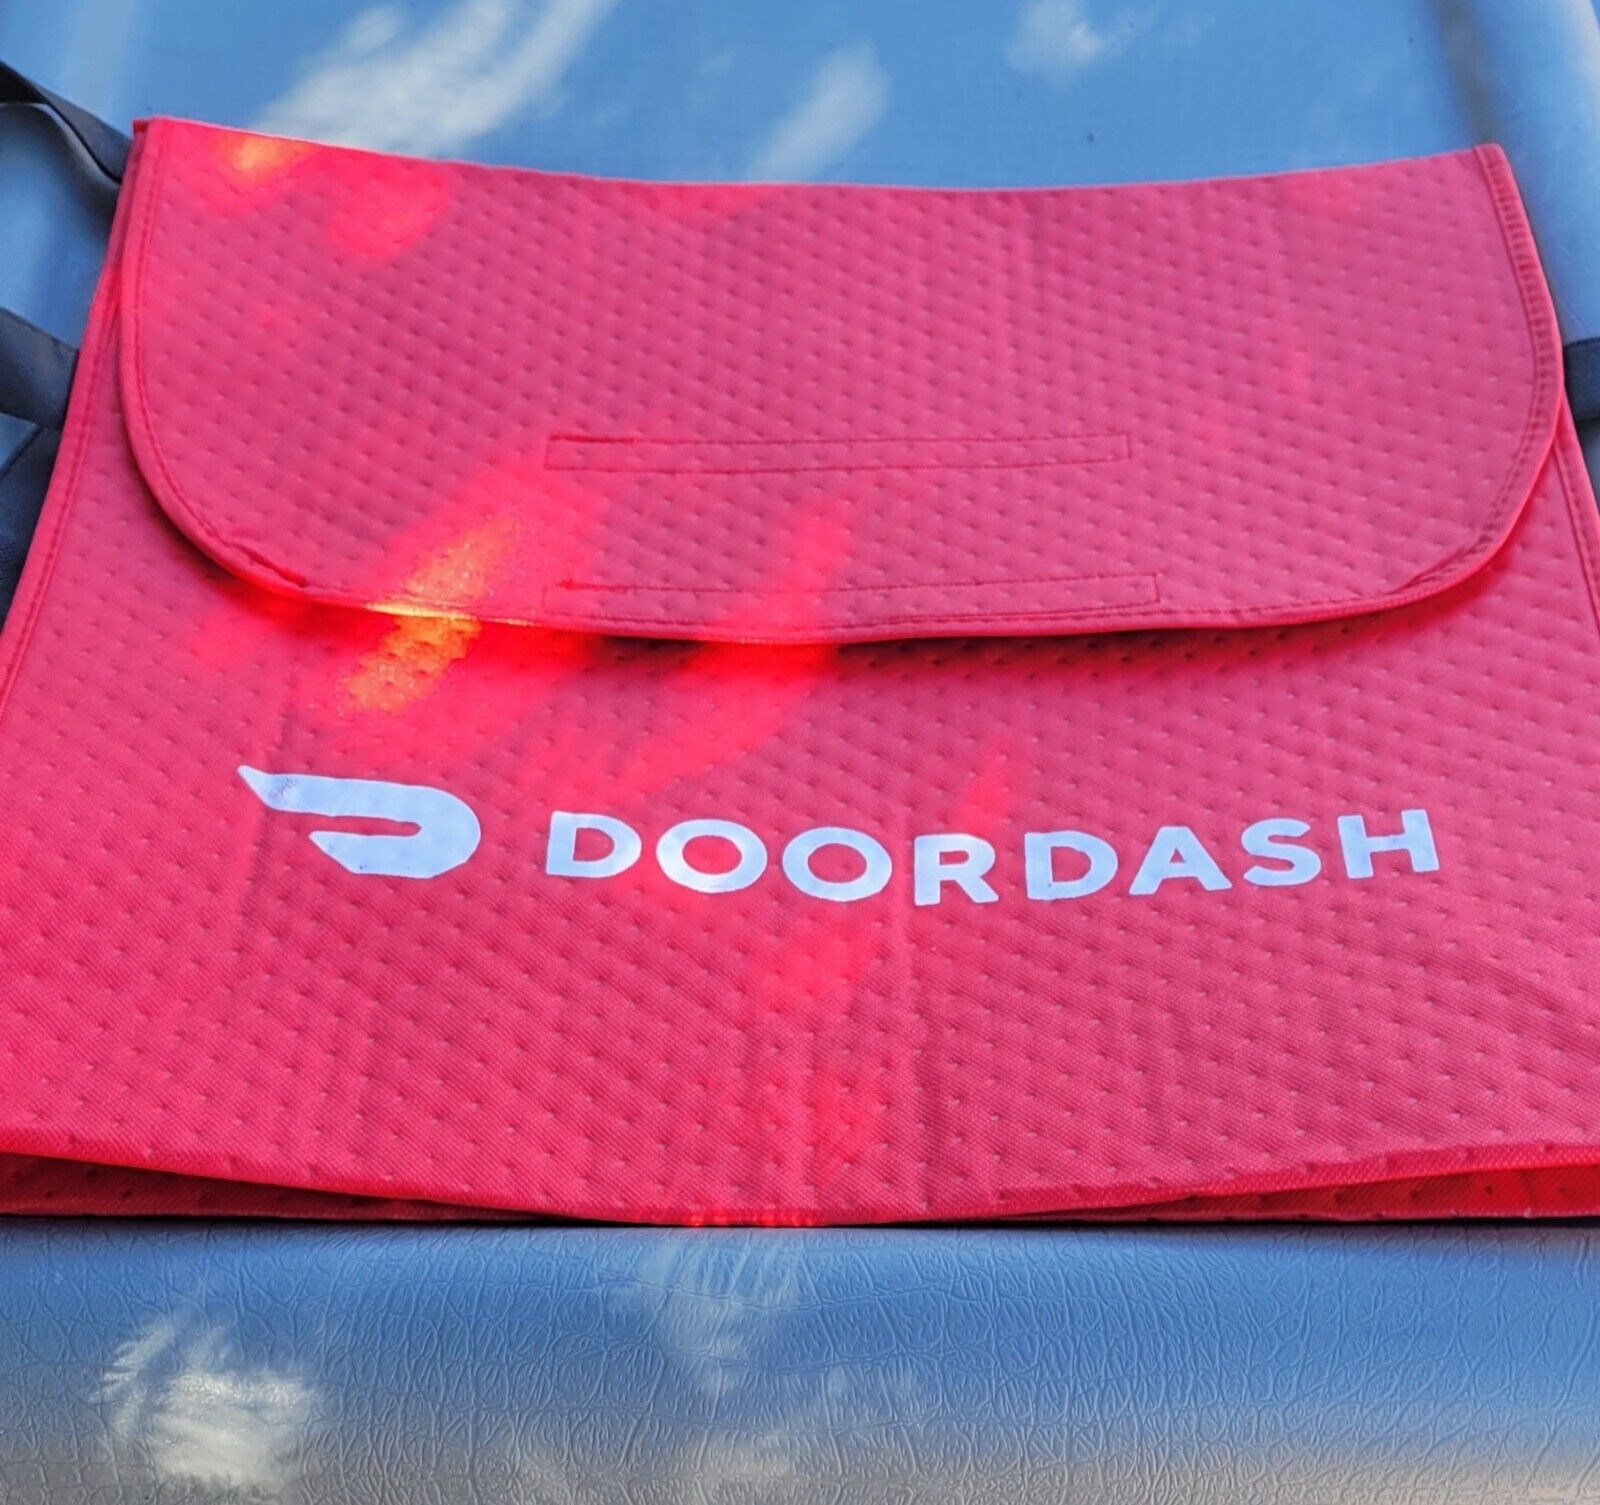 🔥 New Doordash 2PK Insulated Pizza Bag Red & Black 9 x 19 x 6 